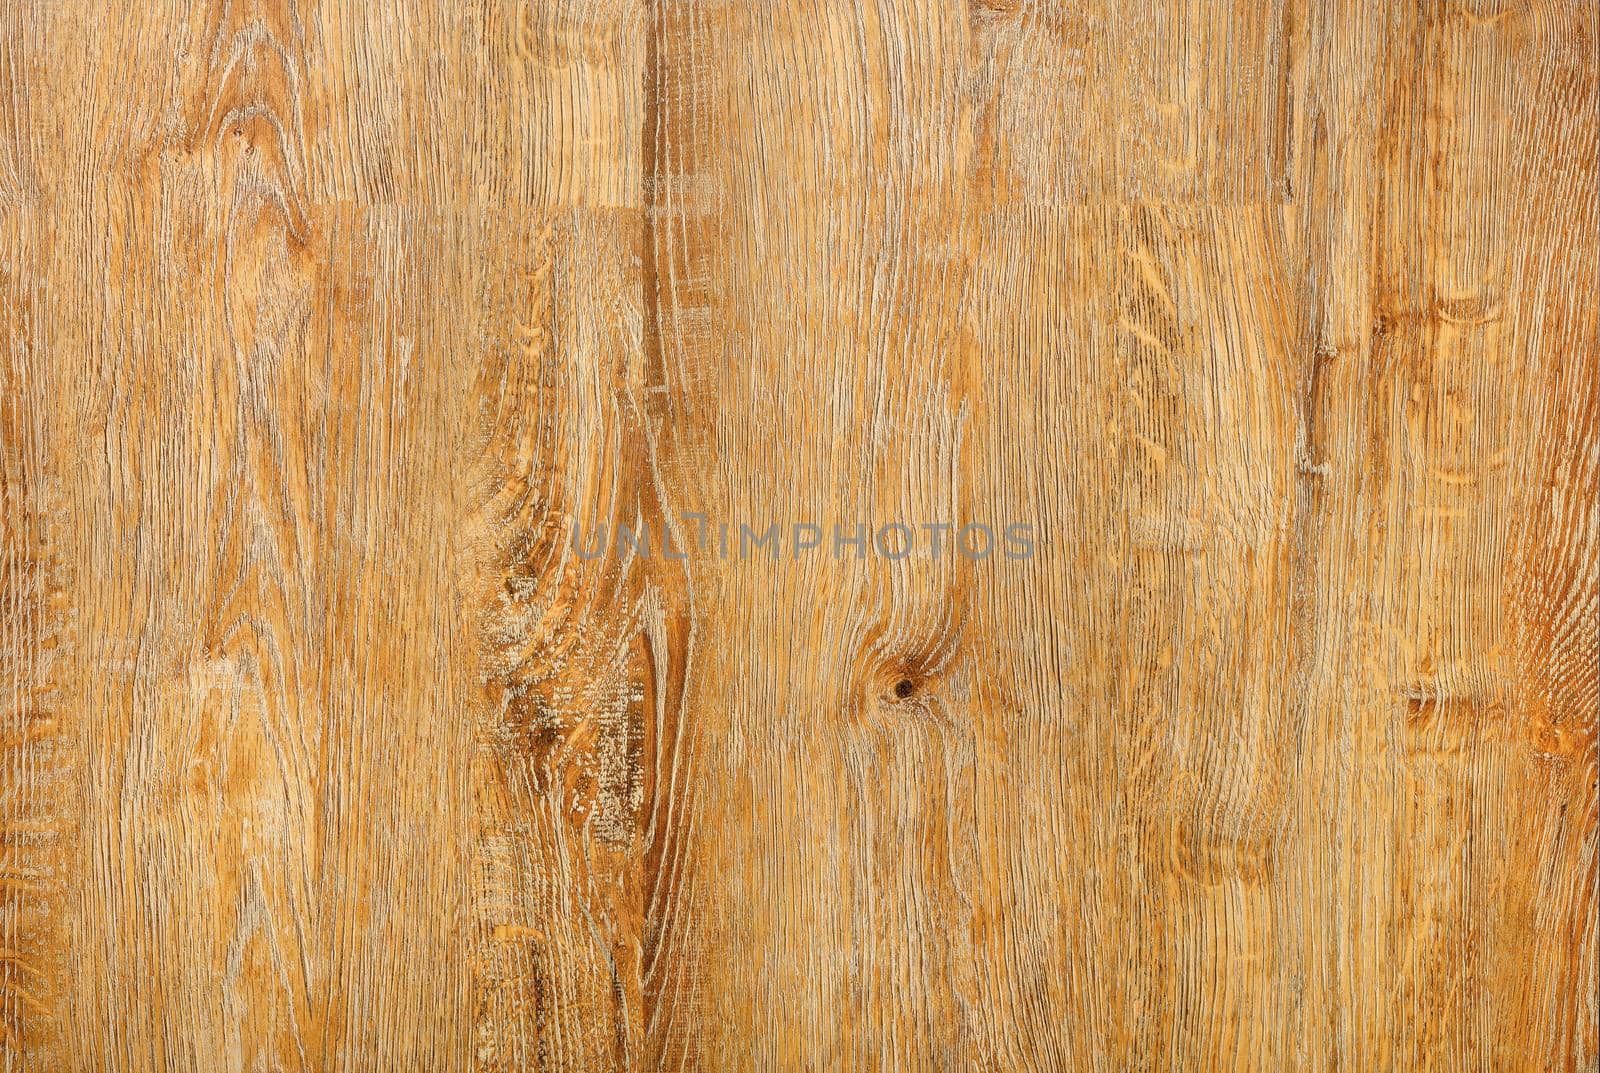 A beautiful pattern on light wood in the form of a smooth wooden surface with vertical fibers lines.